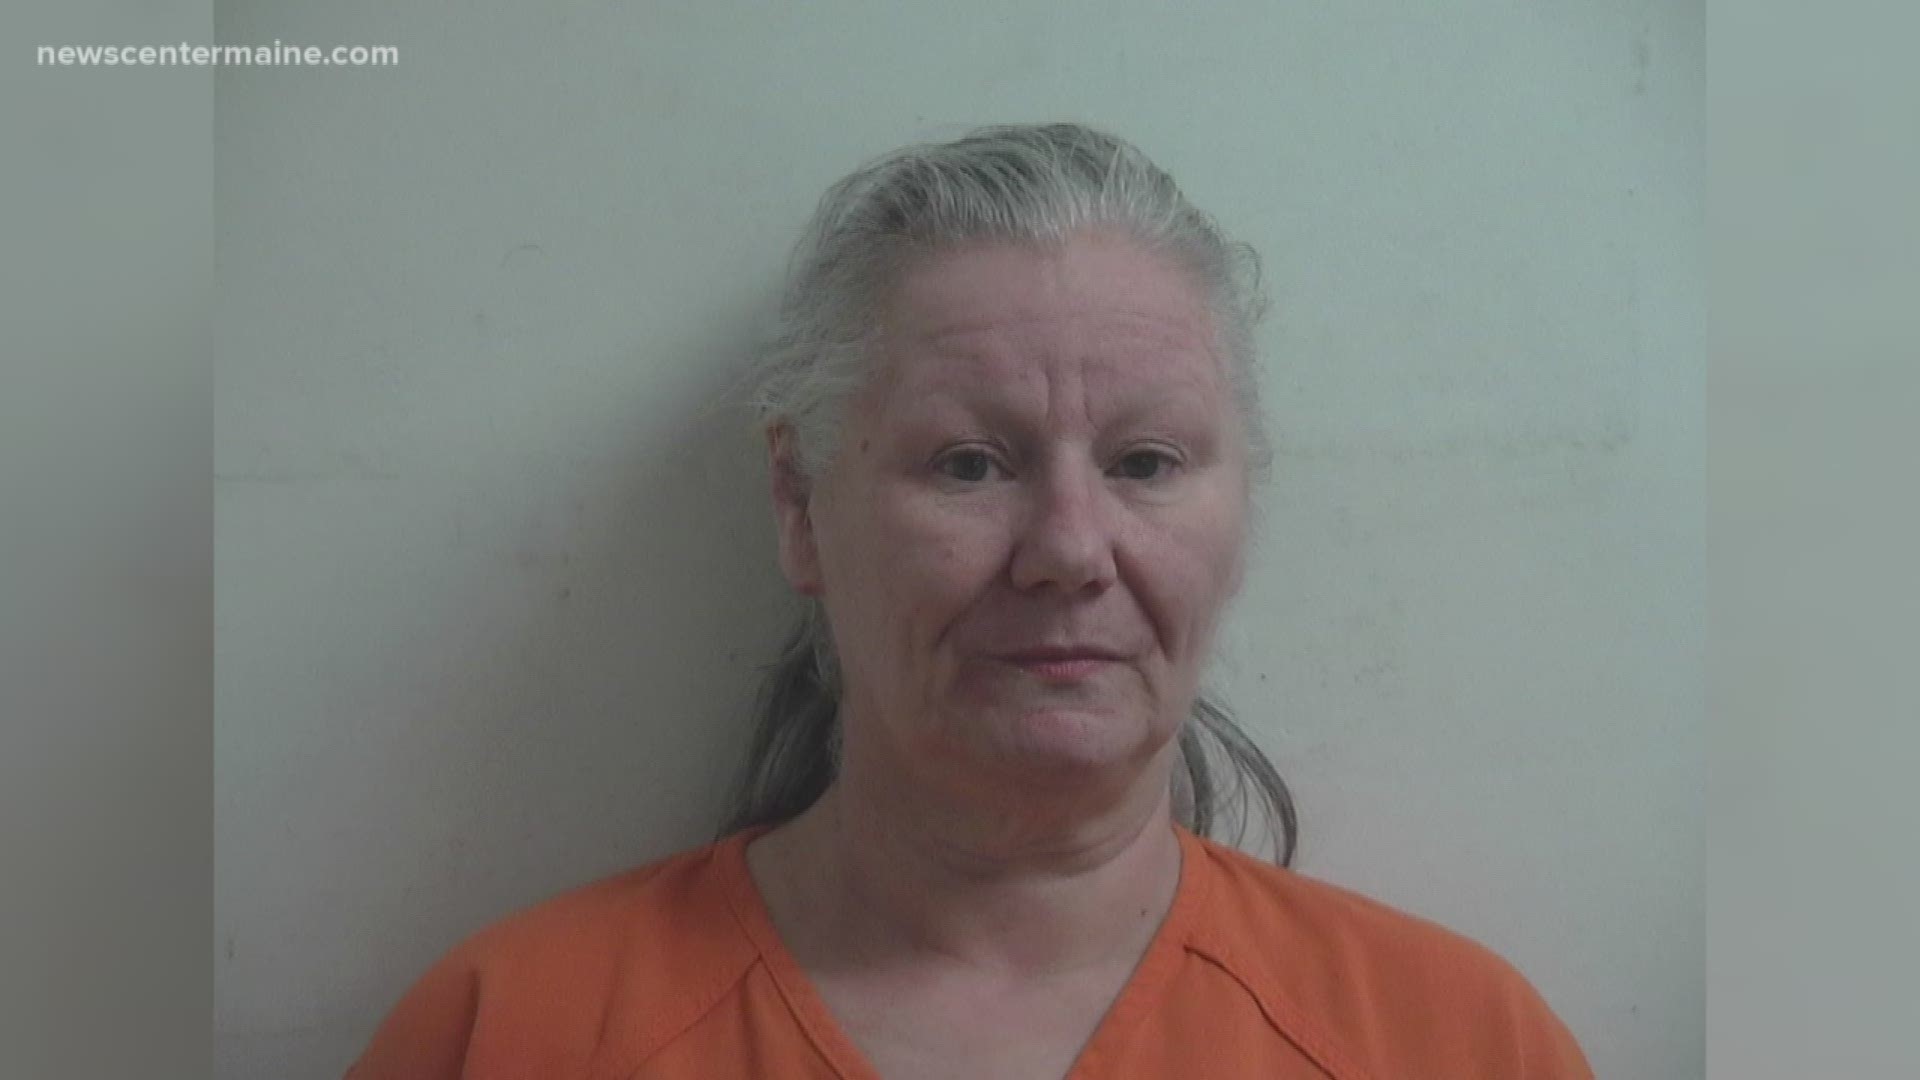 A Waterford woman was arrested Thursday morning after an eight-hour stand-off regarding a domestic violence situation.